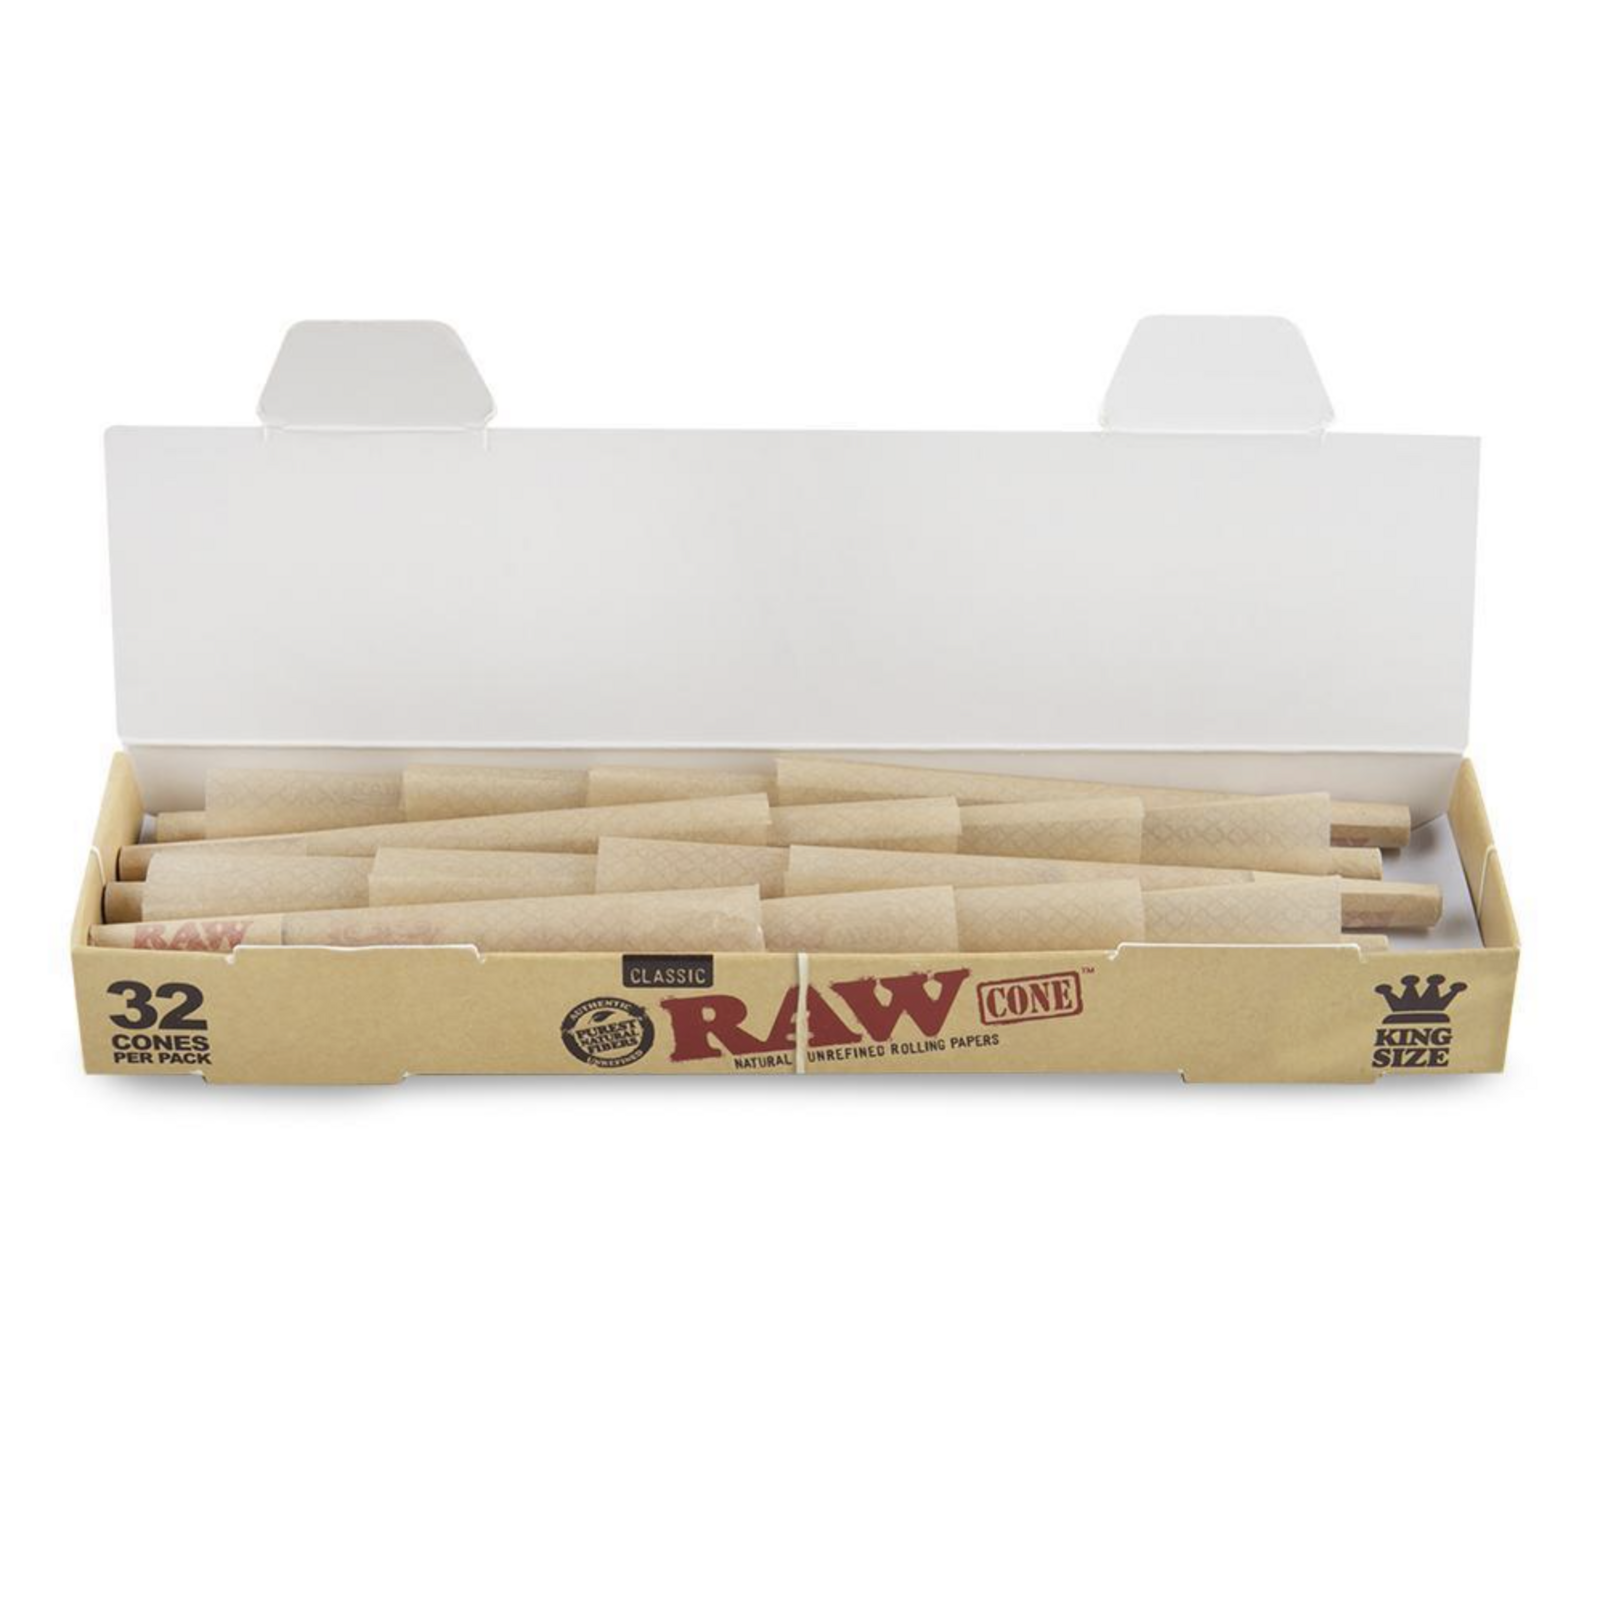 Raw Classic Natural Unrefined king size Pre Rolled Paper Cones 32 Pack Cone.